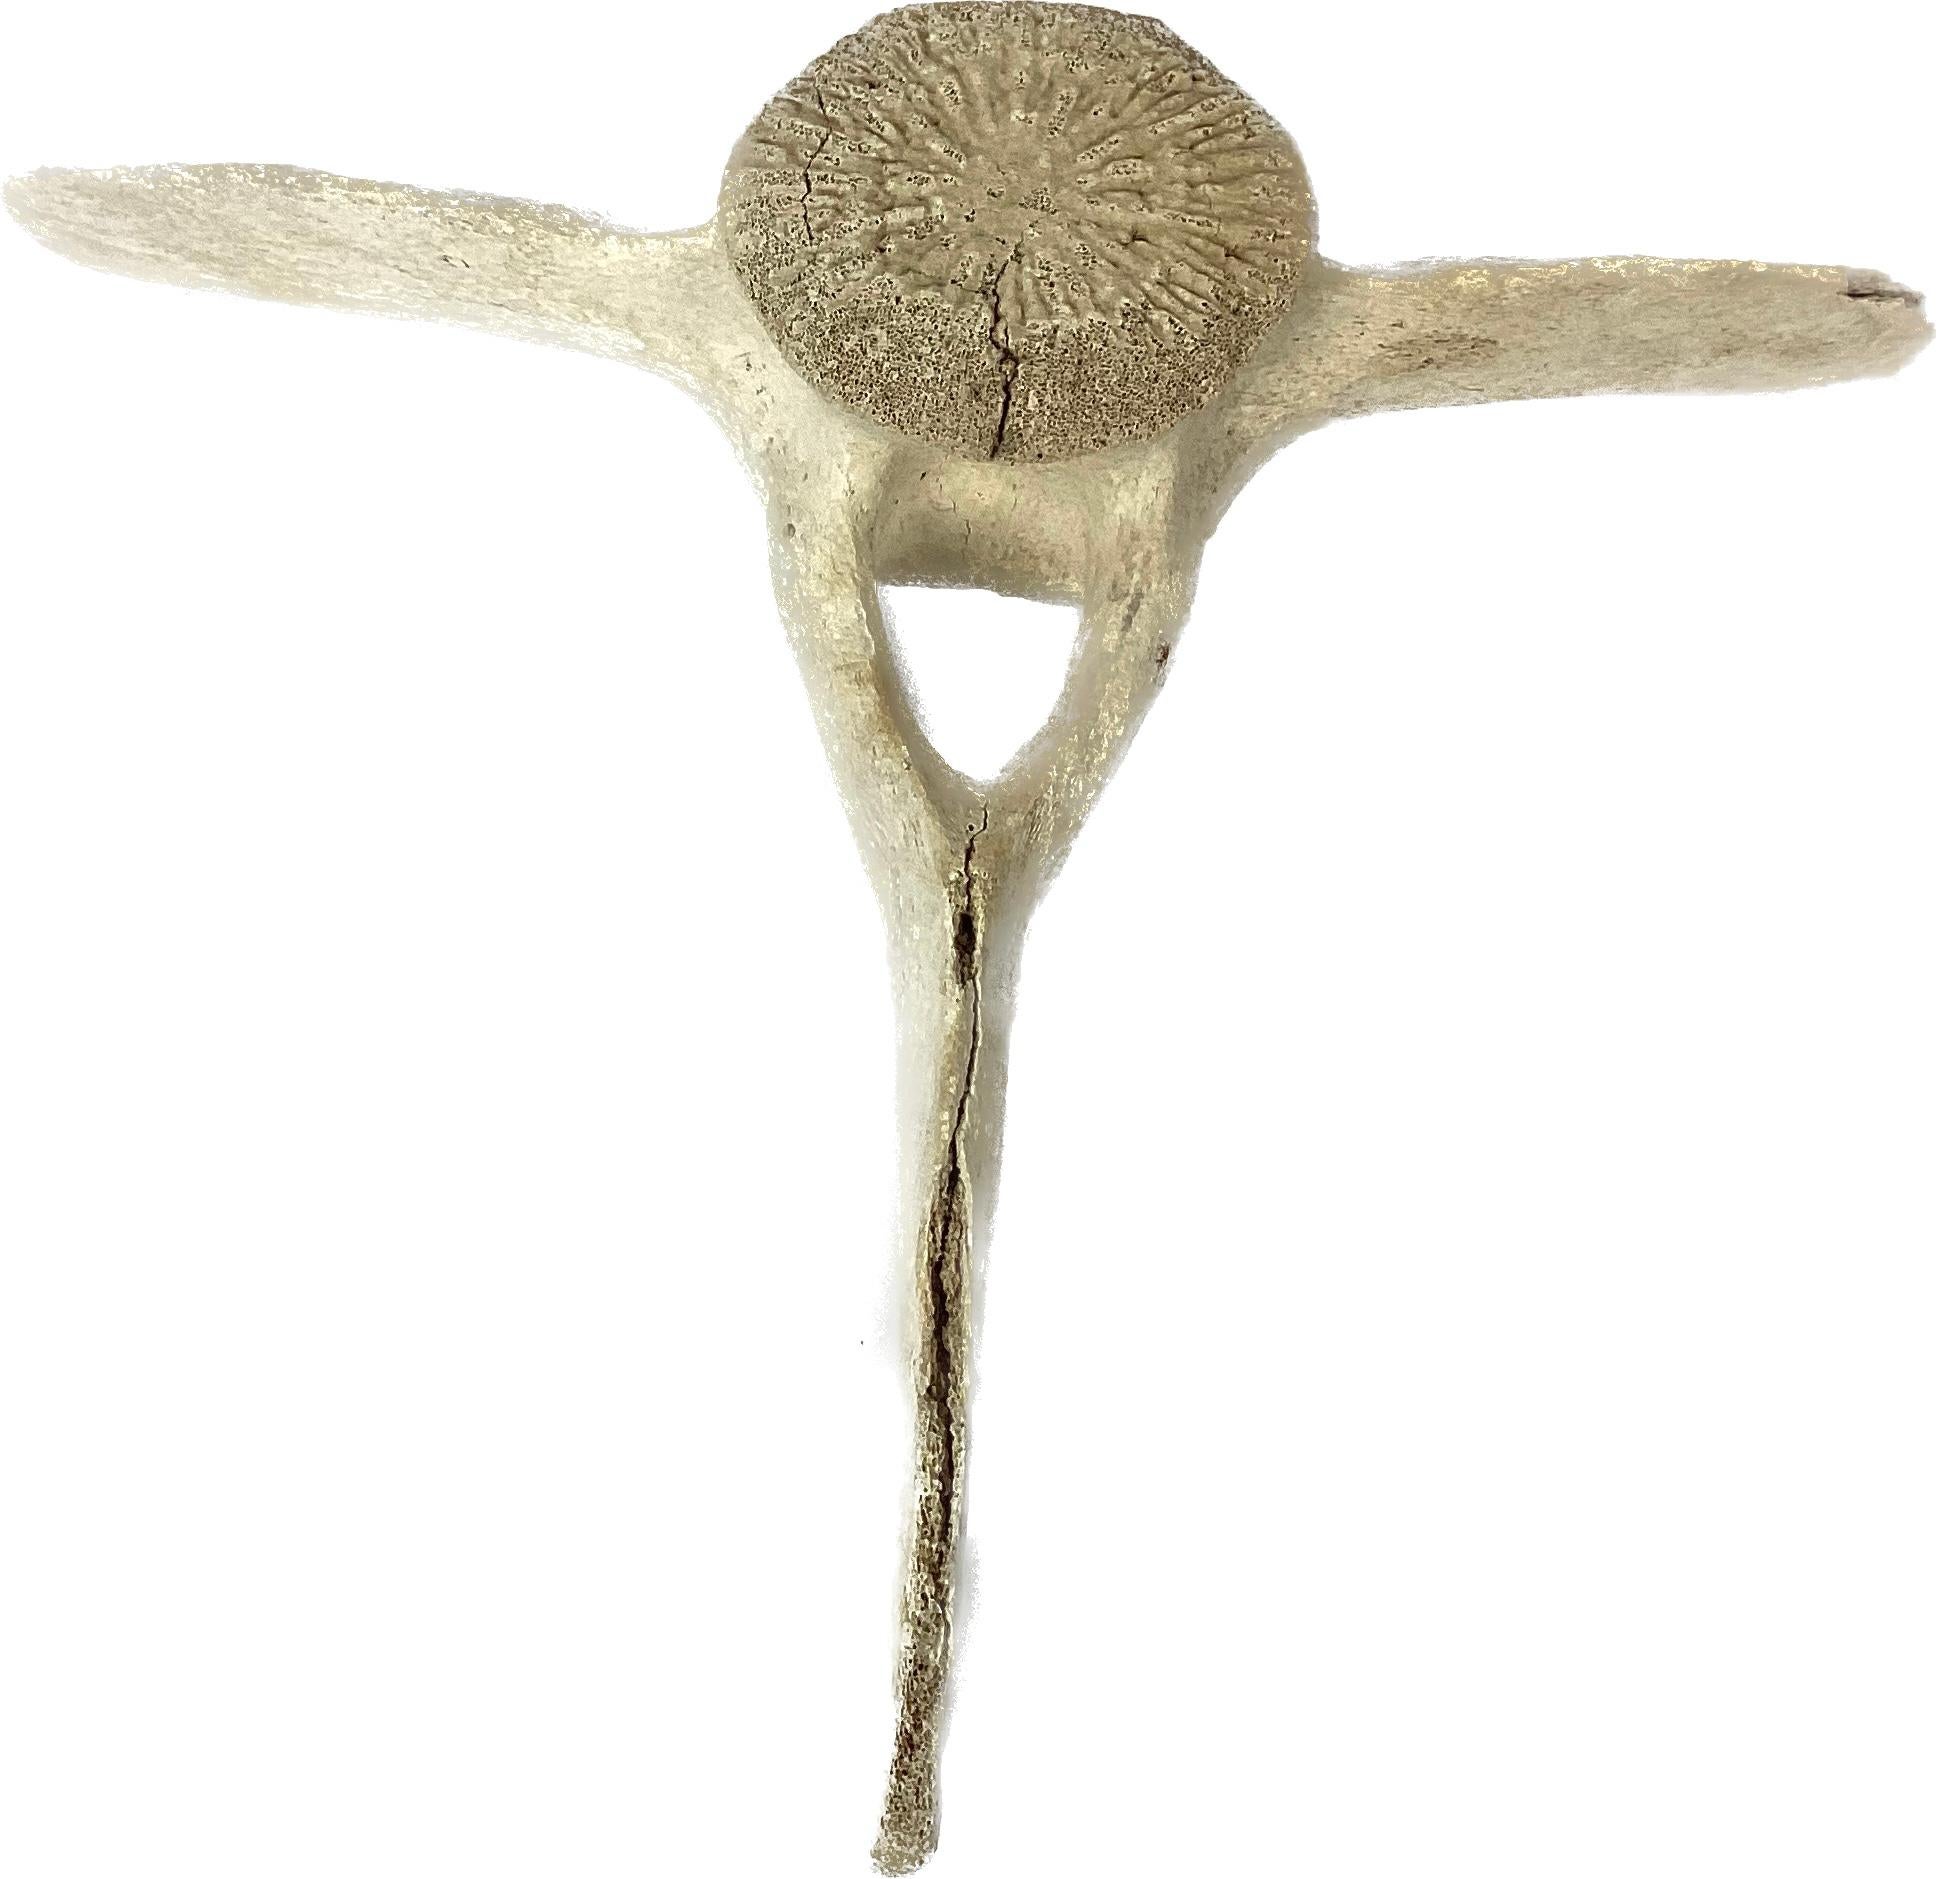 Natural weathered fossilized Carved Whale Vertebrae. One section / specimen. Possibly sperm whale. Likely 19th century. Carving of an animal on the front, center of the vertebrae.